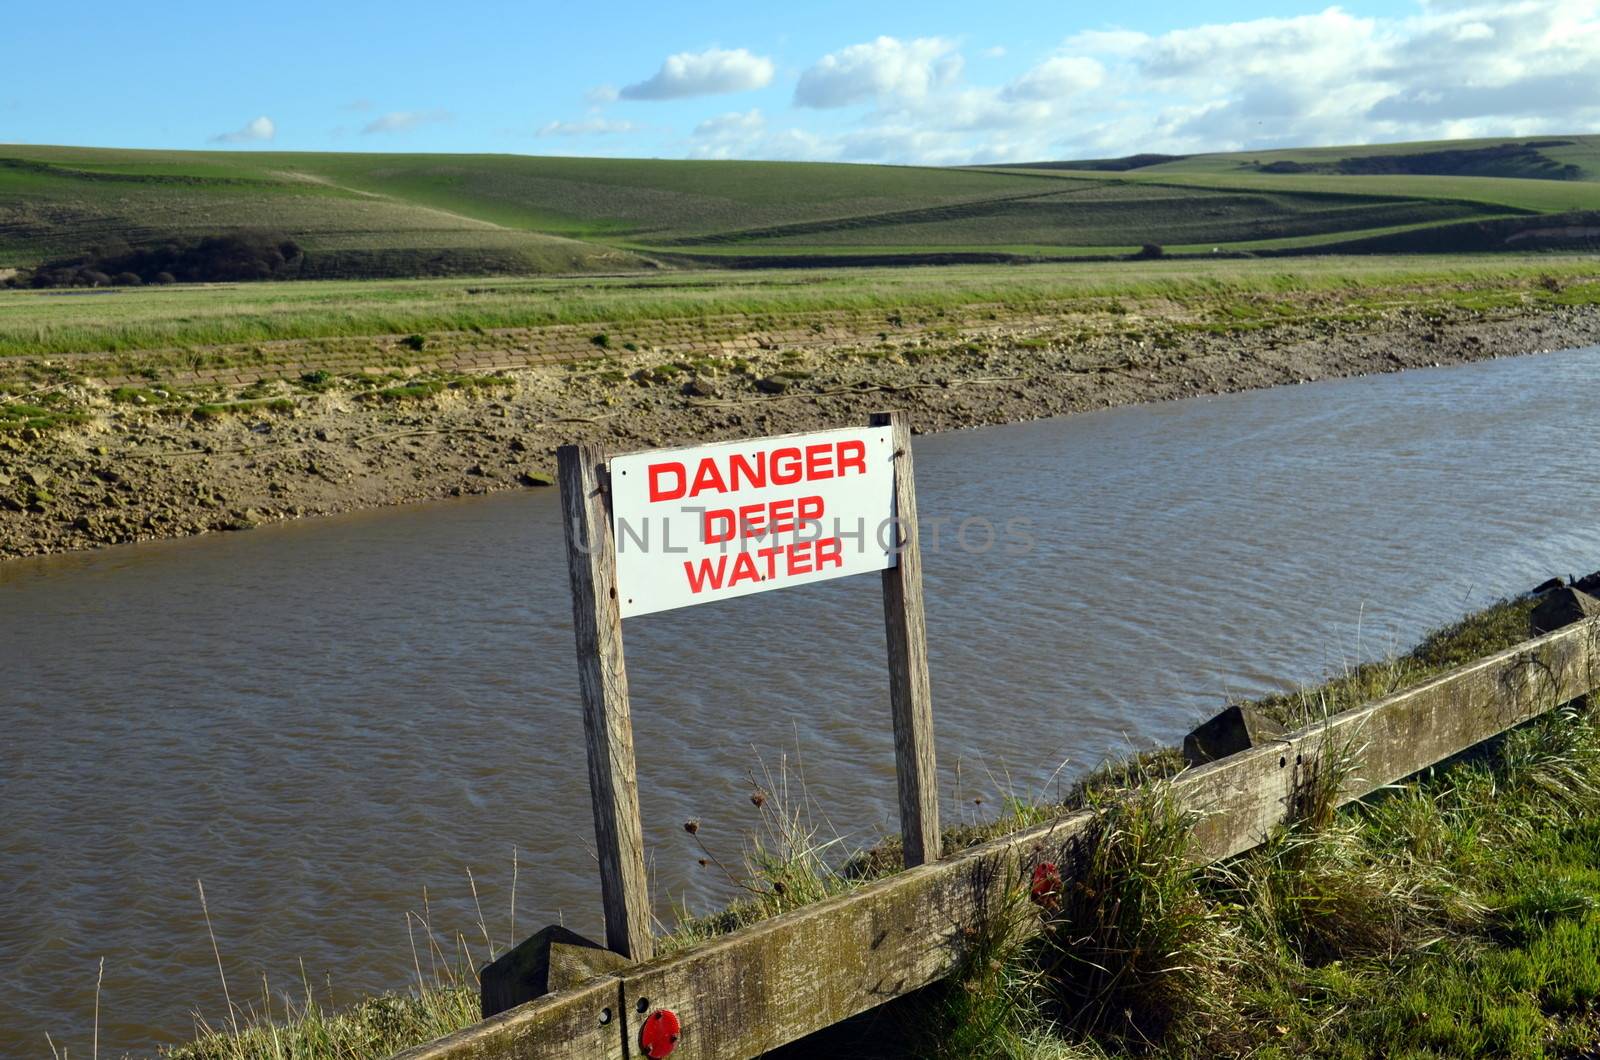 Along Cuckmere river in Sussex, England a sign informing to be careful because of deep water.